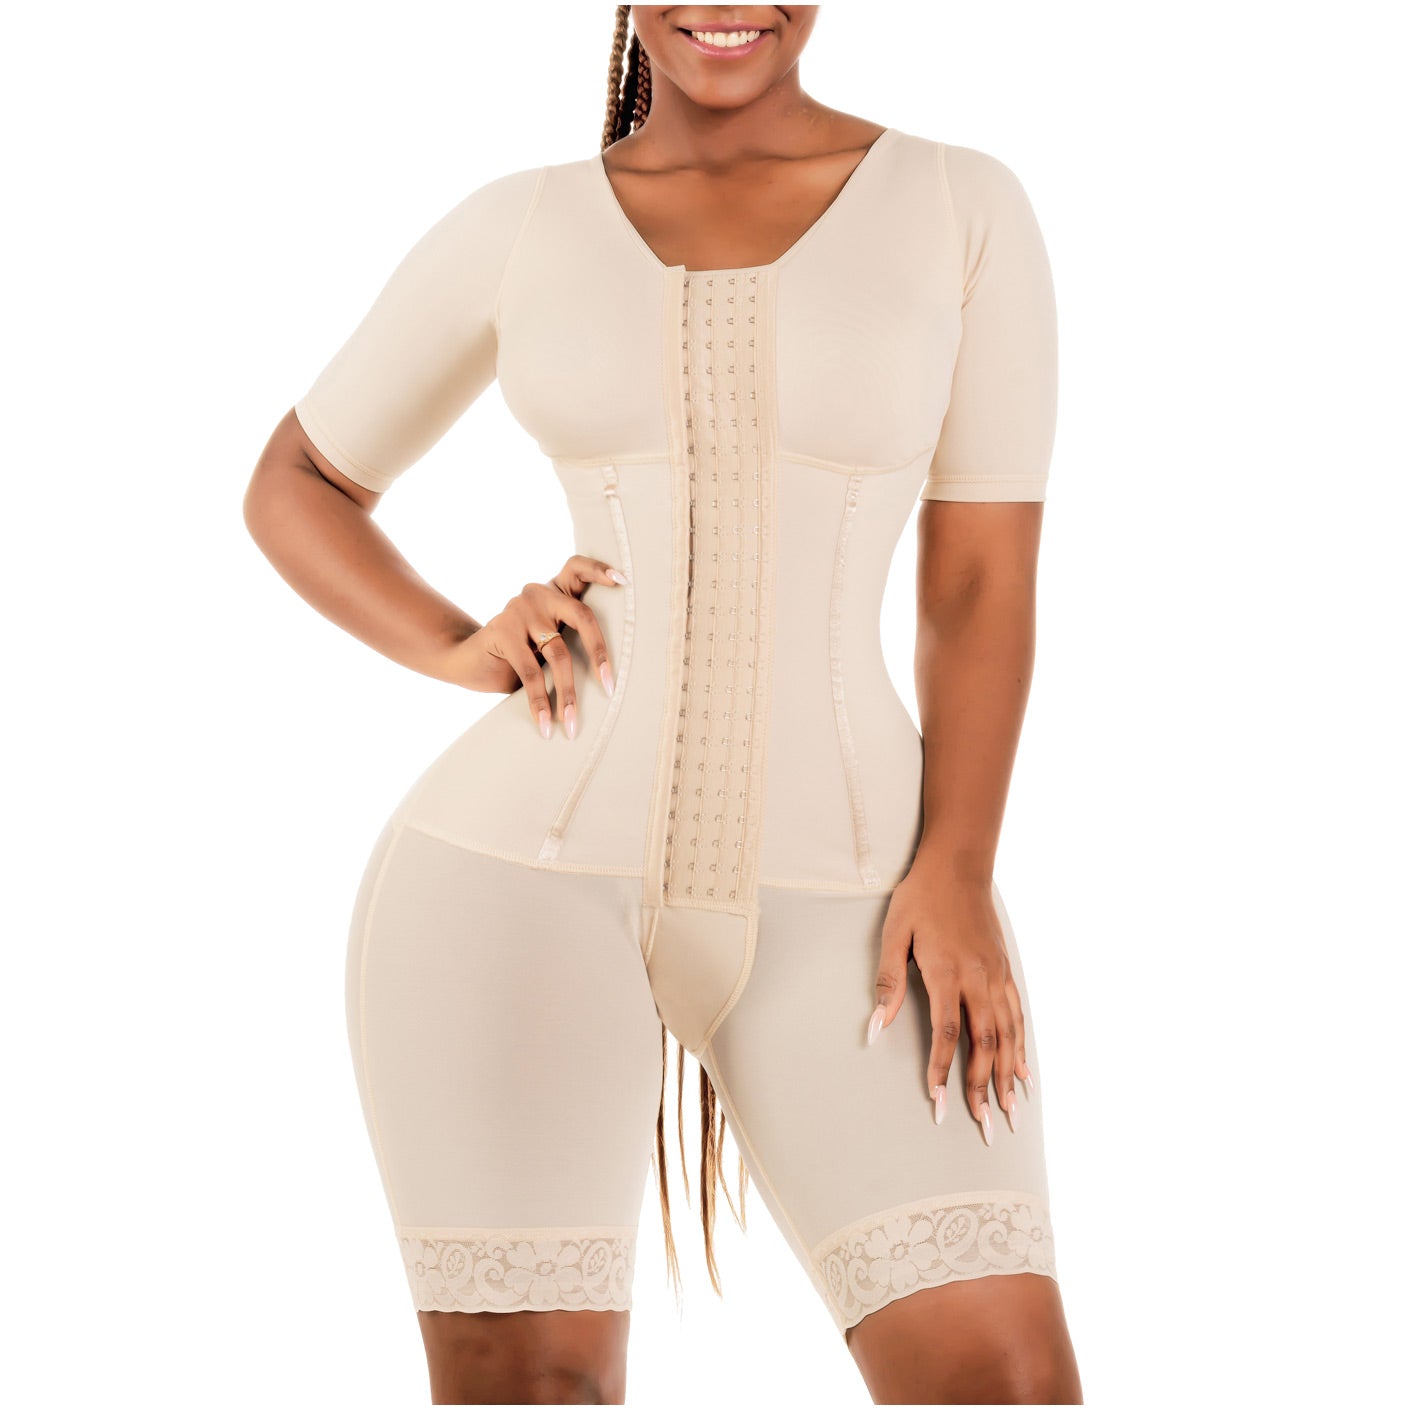  Fajas Colombianas Post Surgery Compression Shapewear